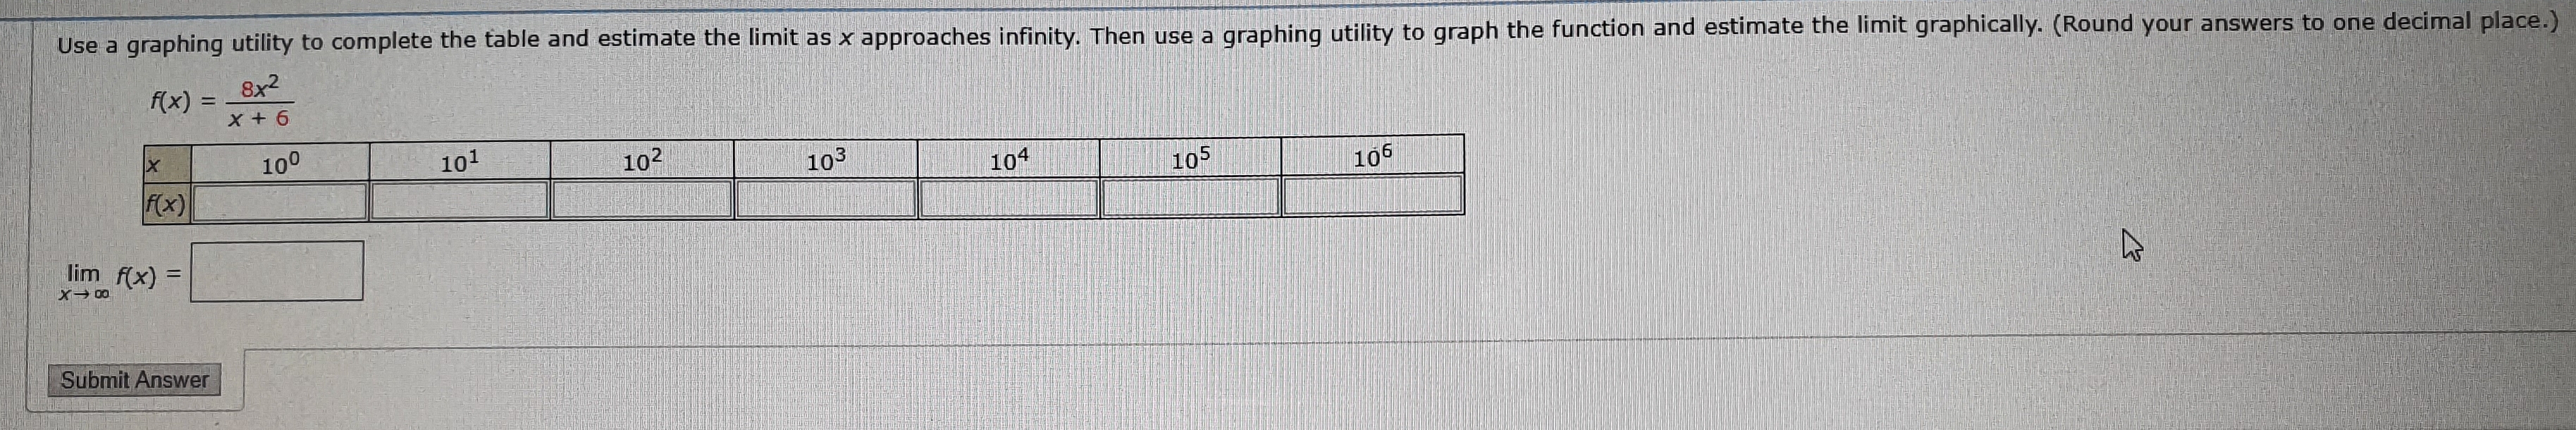 Use a graphing utility to complete the table and estimate the limit as x approaches infinity. Then use a
graphinq utility to graph the function and estimate the limit graphically. (Round your answers to one decimal place.)
8x2
f(x)
X +6
100
101
102
103
104
105
fx)
106
lim f(x)
Submit Answer
